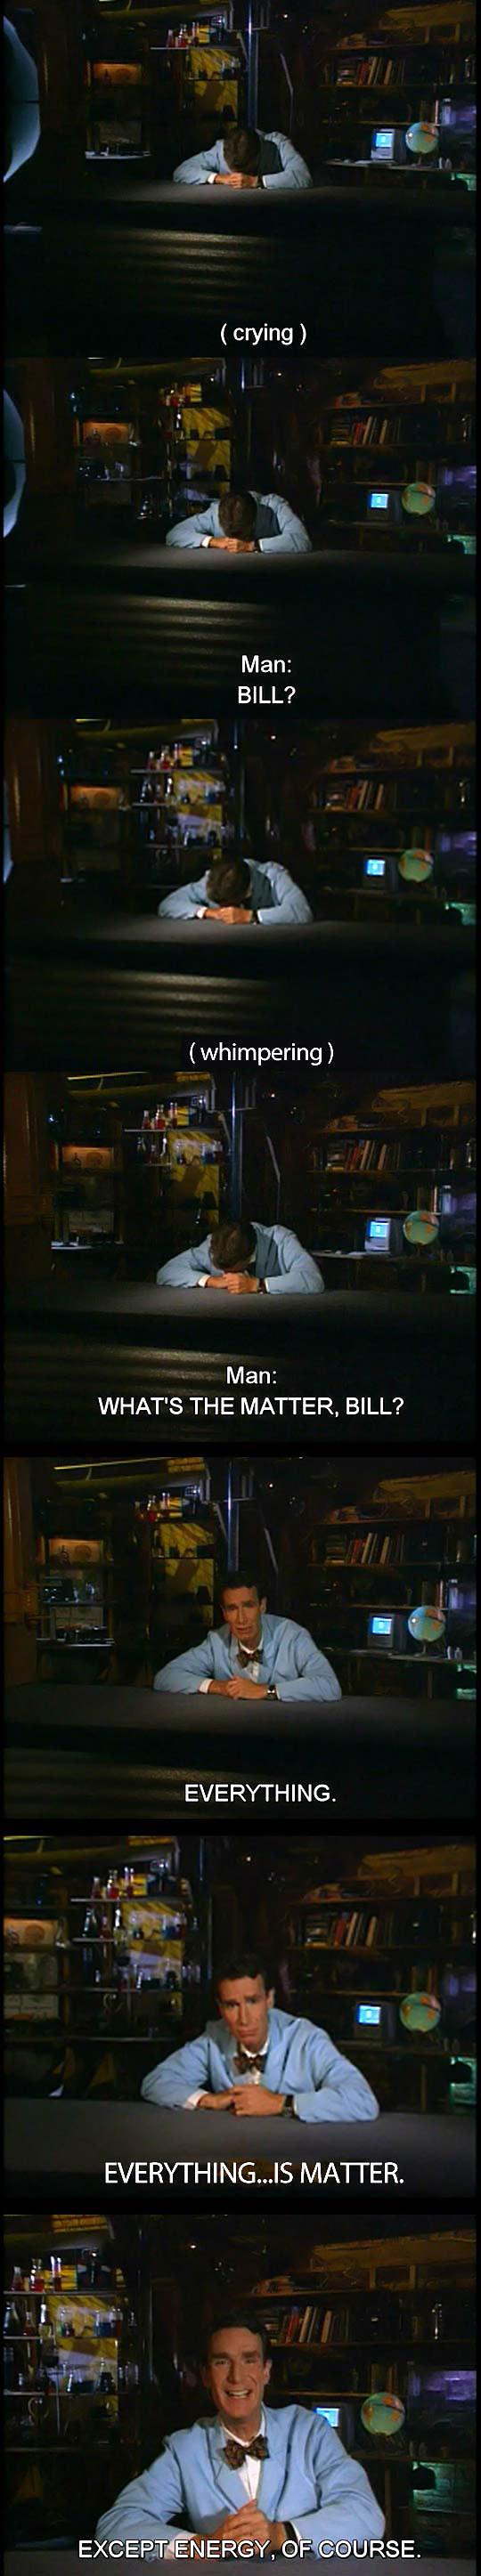 Hey Bill, What's The Matter?